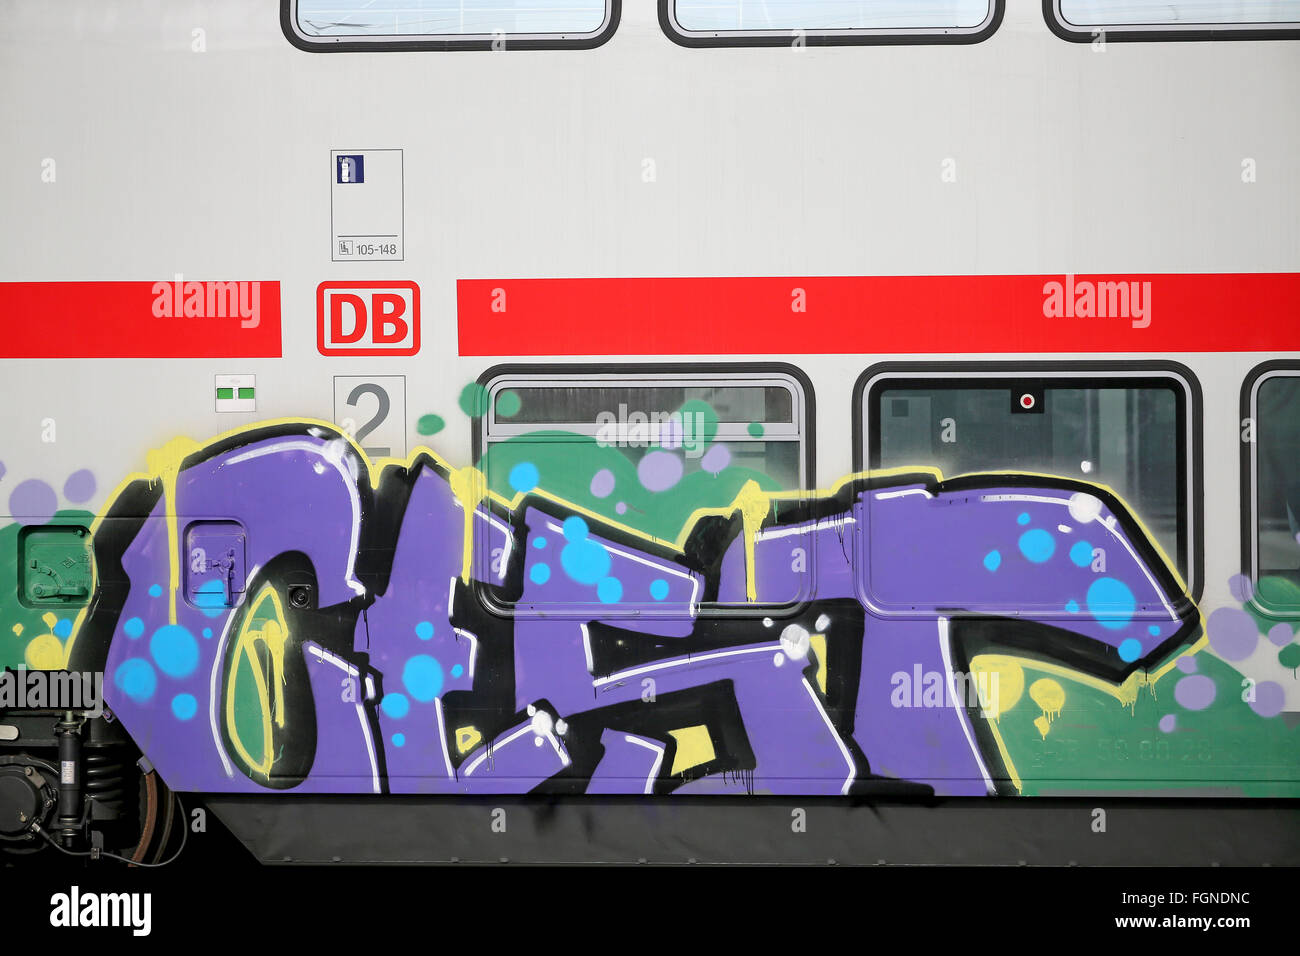 Leipzig, Germany. 19th Feb, 2016. A two-storeyed IC train with graffiti standing at the central station in Leipzig, Germany, 19 February 2016. The graffiti damage is yet another misfortune for the train model Intercity 2. PHOTO: JAN WOITAS/dpa/Alamy Live News Stock Photo